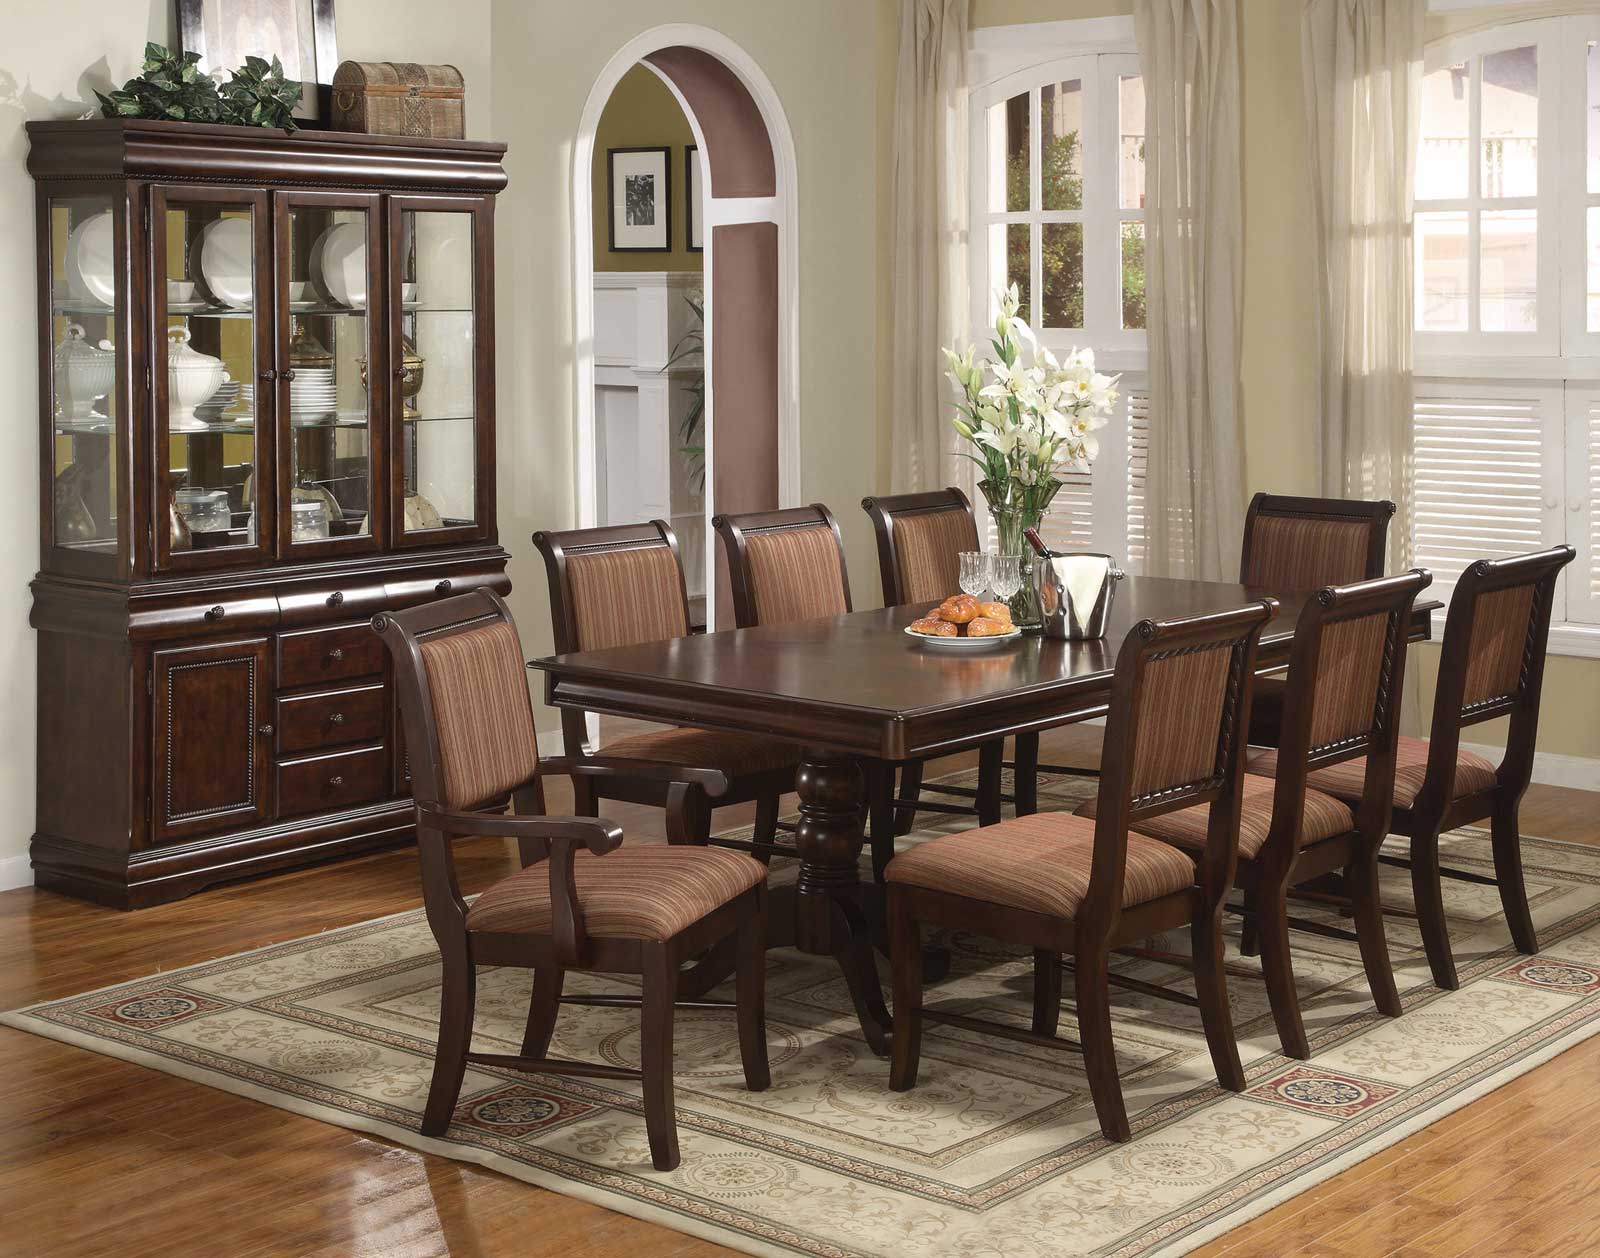 Inspiring Traditional Color Awe Inspiring Traditional Dining Room Color Schemes With Simple Traditional Antique Black Wooden Chairs With Rectangular Wooden Dining Room Table Also Cool Laminate Flooring Design Dining Room Wooden Stylish Of Dining Room Chairs